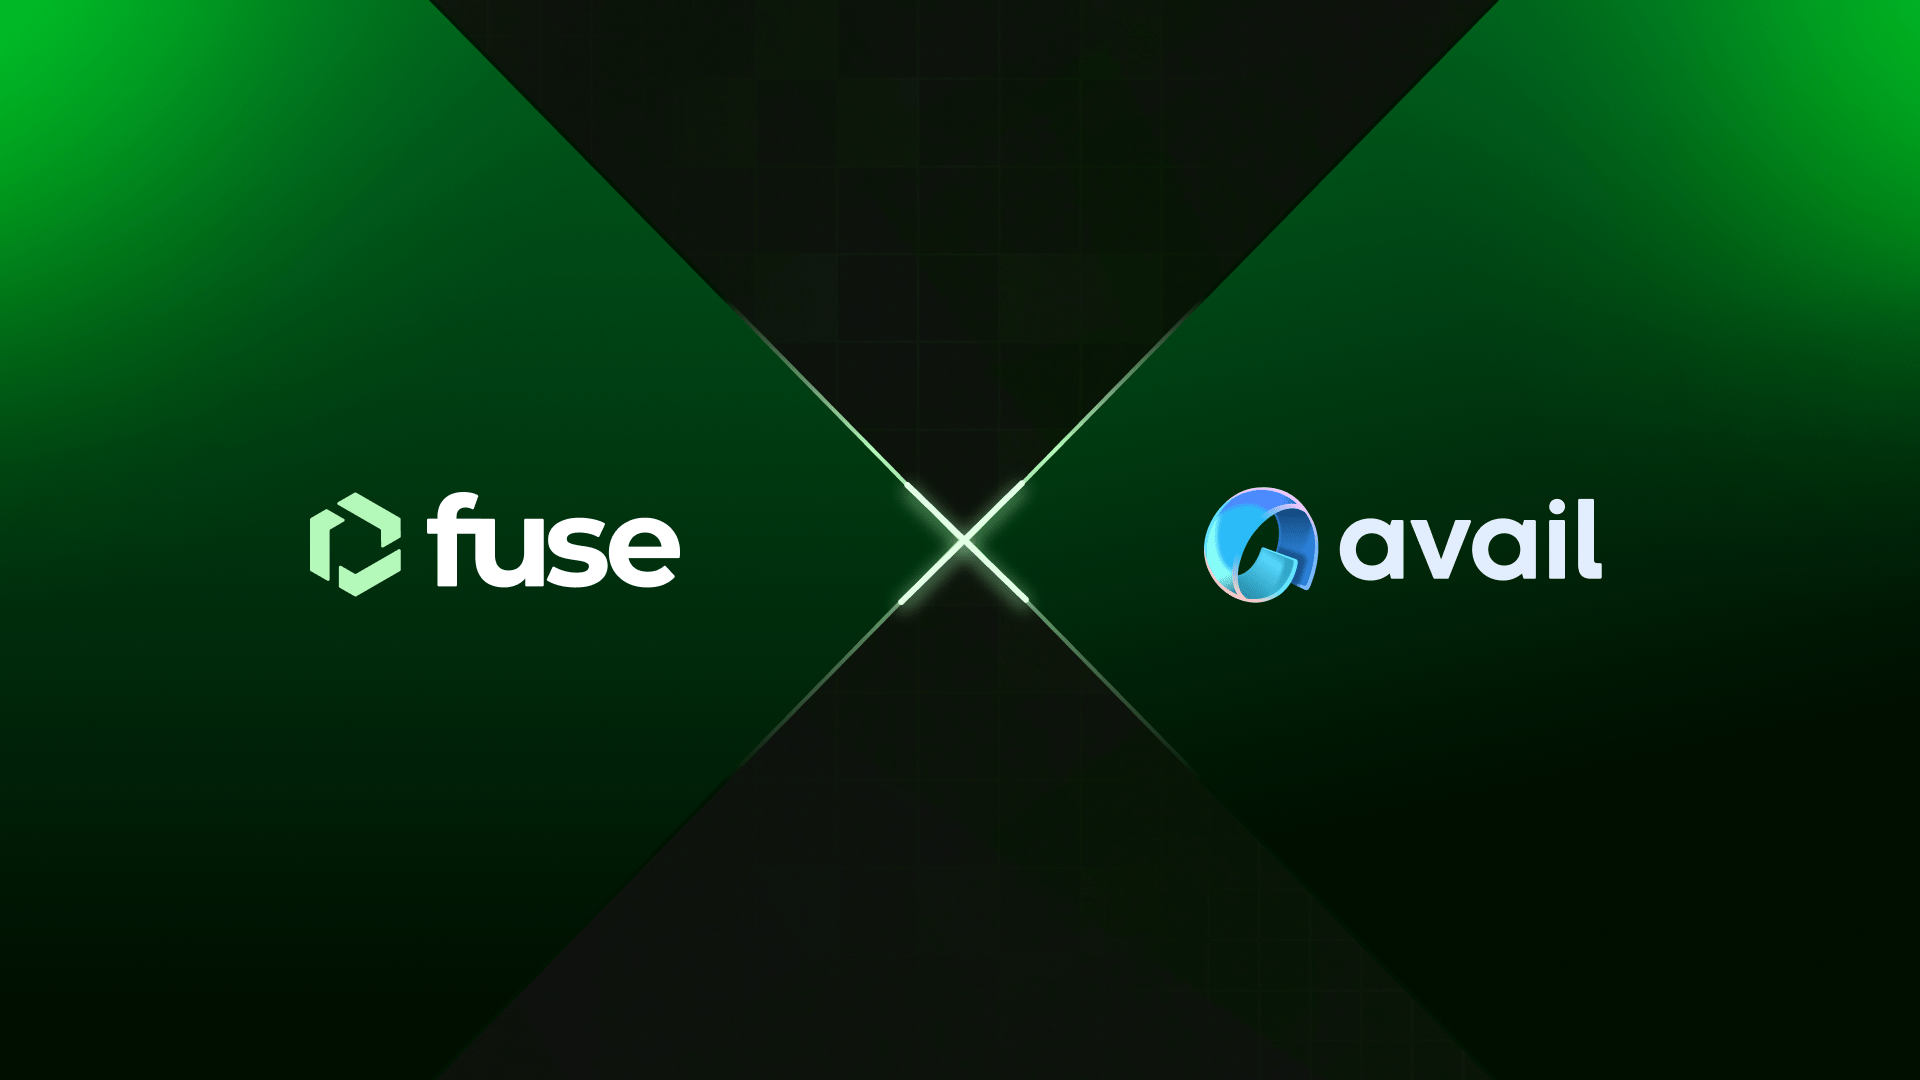 In a groundbreaking move to advance the Fuse ecosystem, we are excited to announce our partnership and integration with Avail.